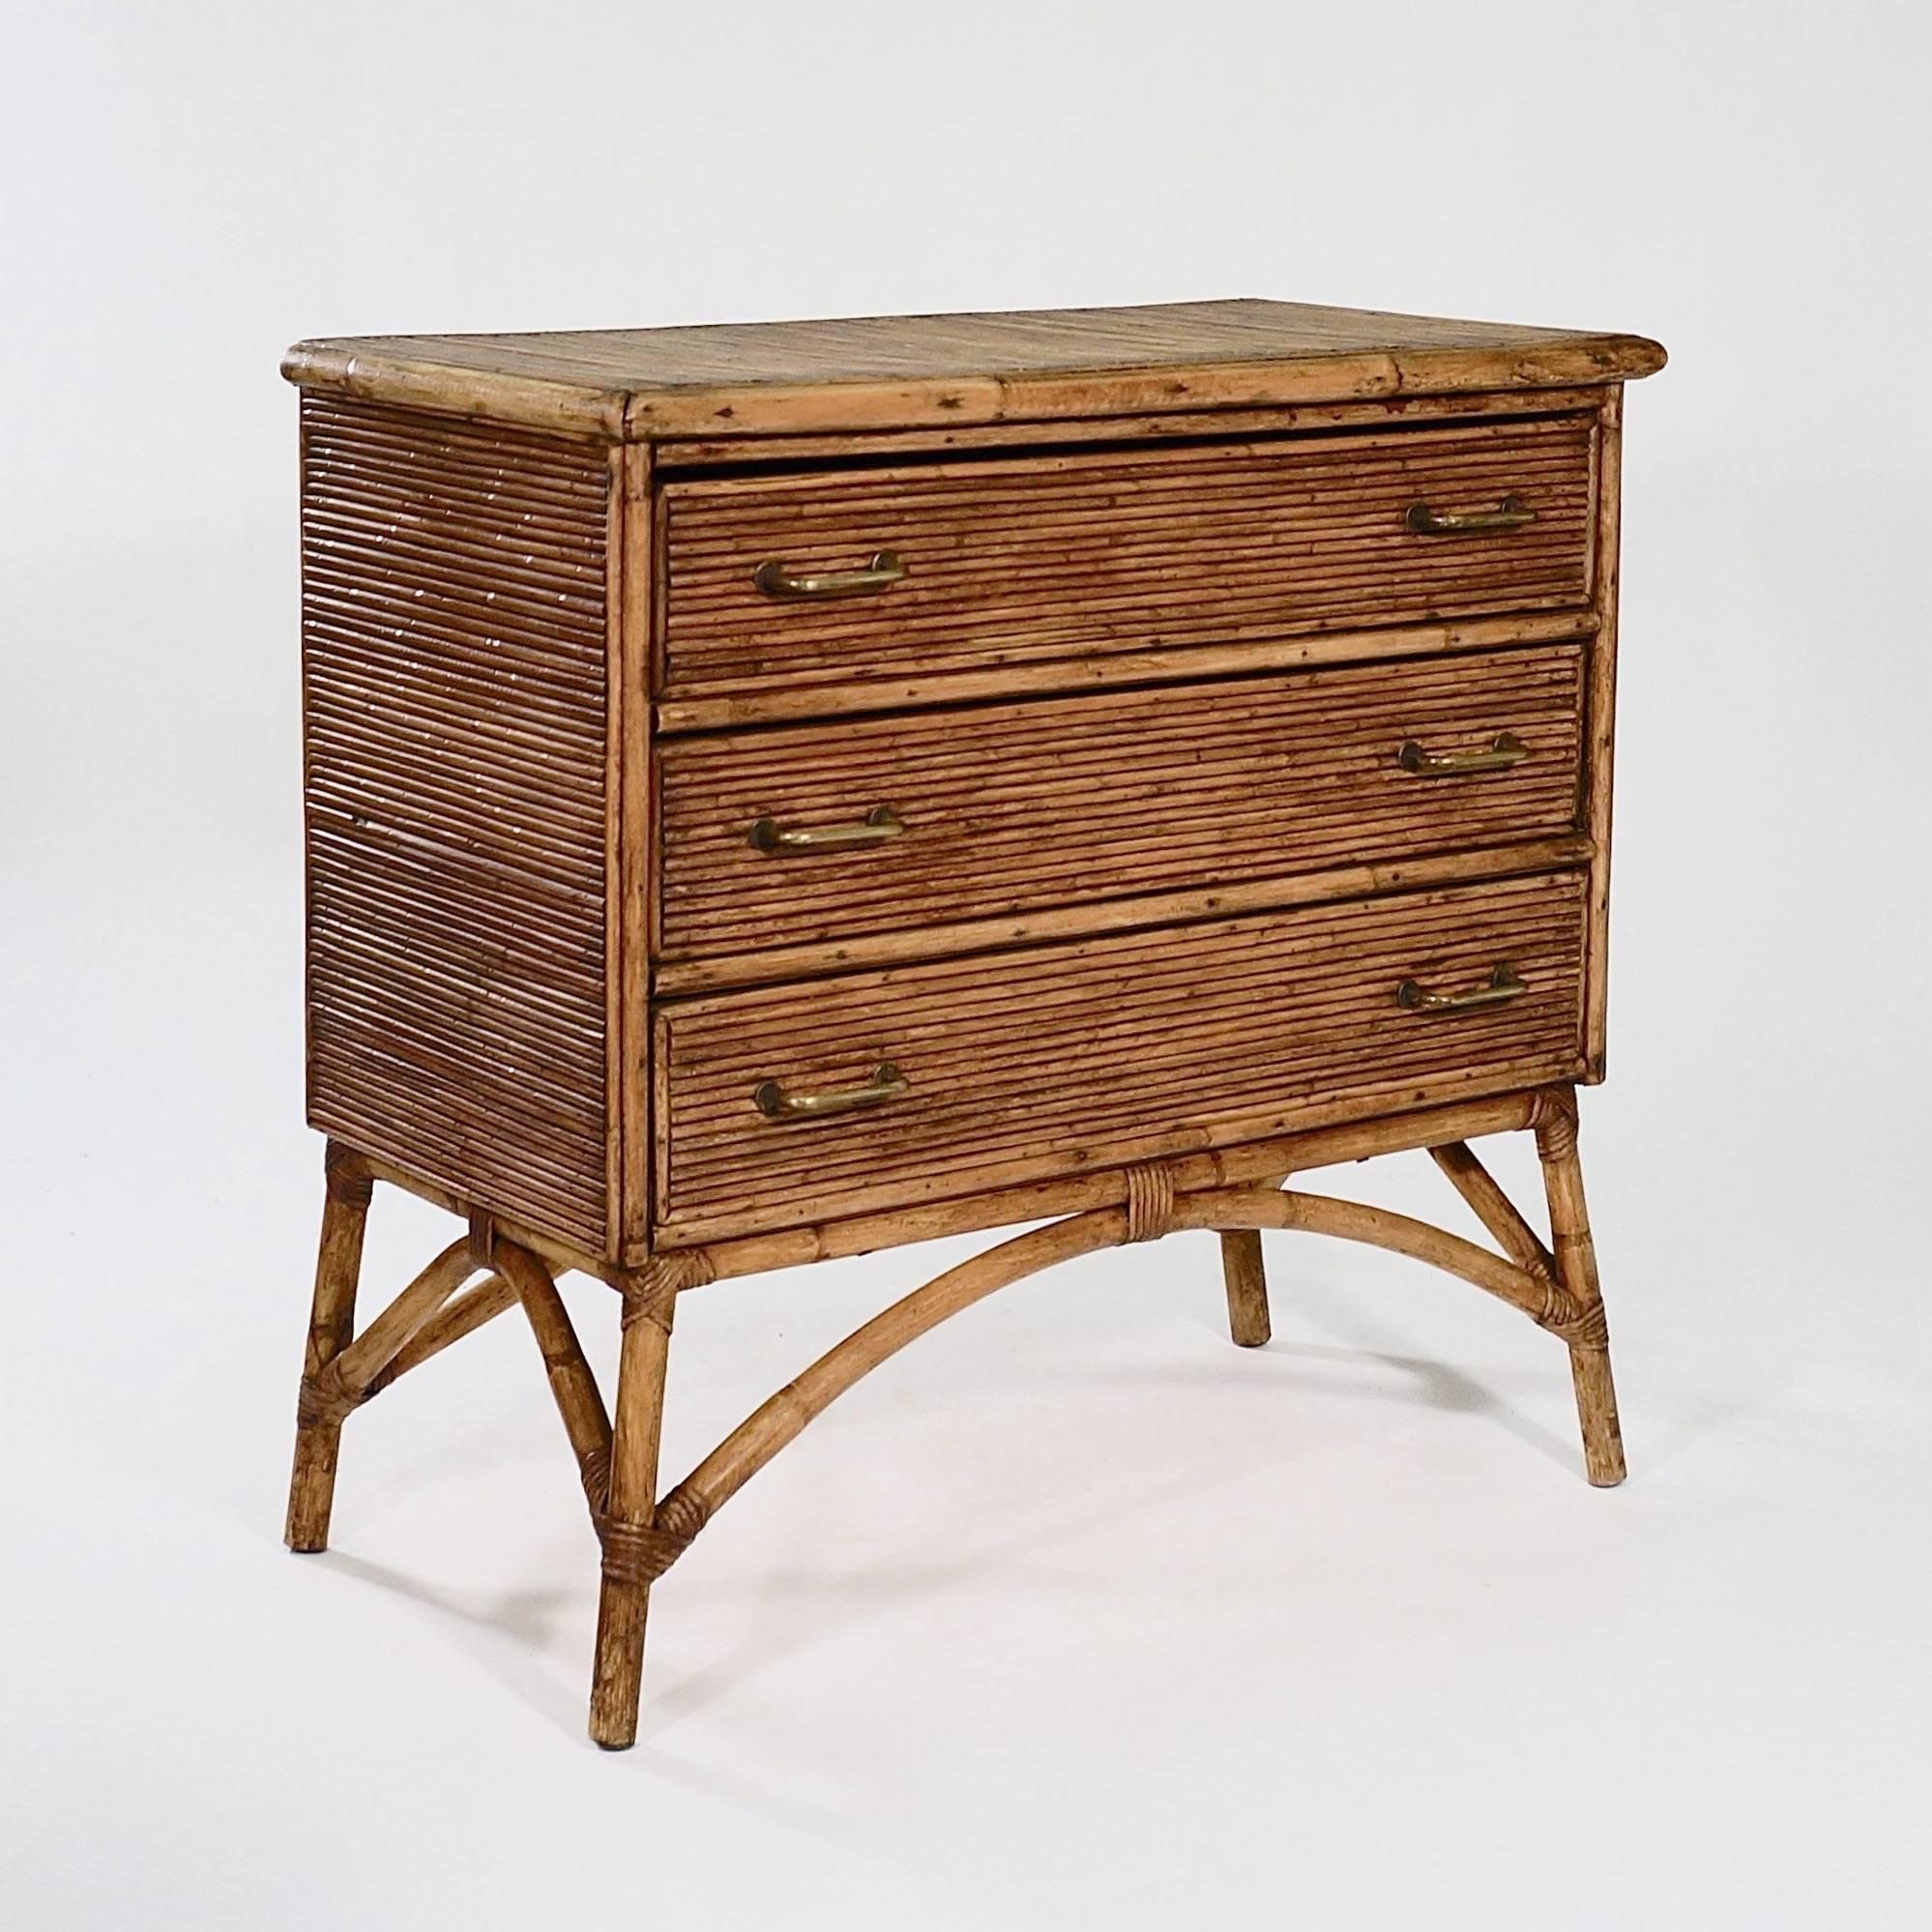 French Provincial Bamboo and Cane-Clad Chest of Drawers